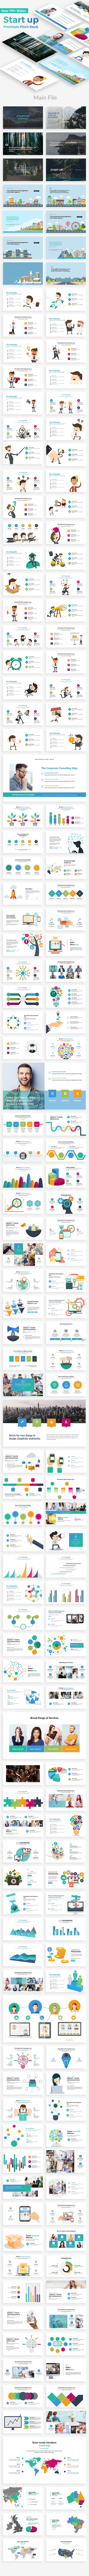 GraphicRiver Startup Pitch Deck Powerpoint Template 20992130